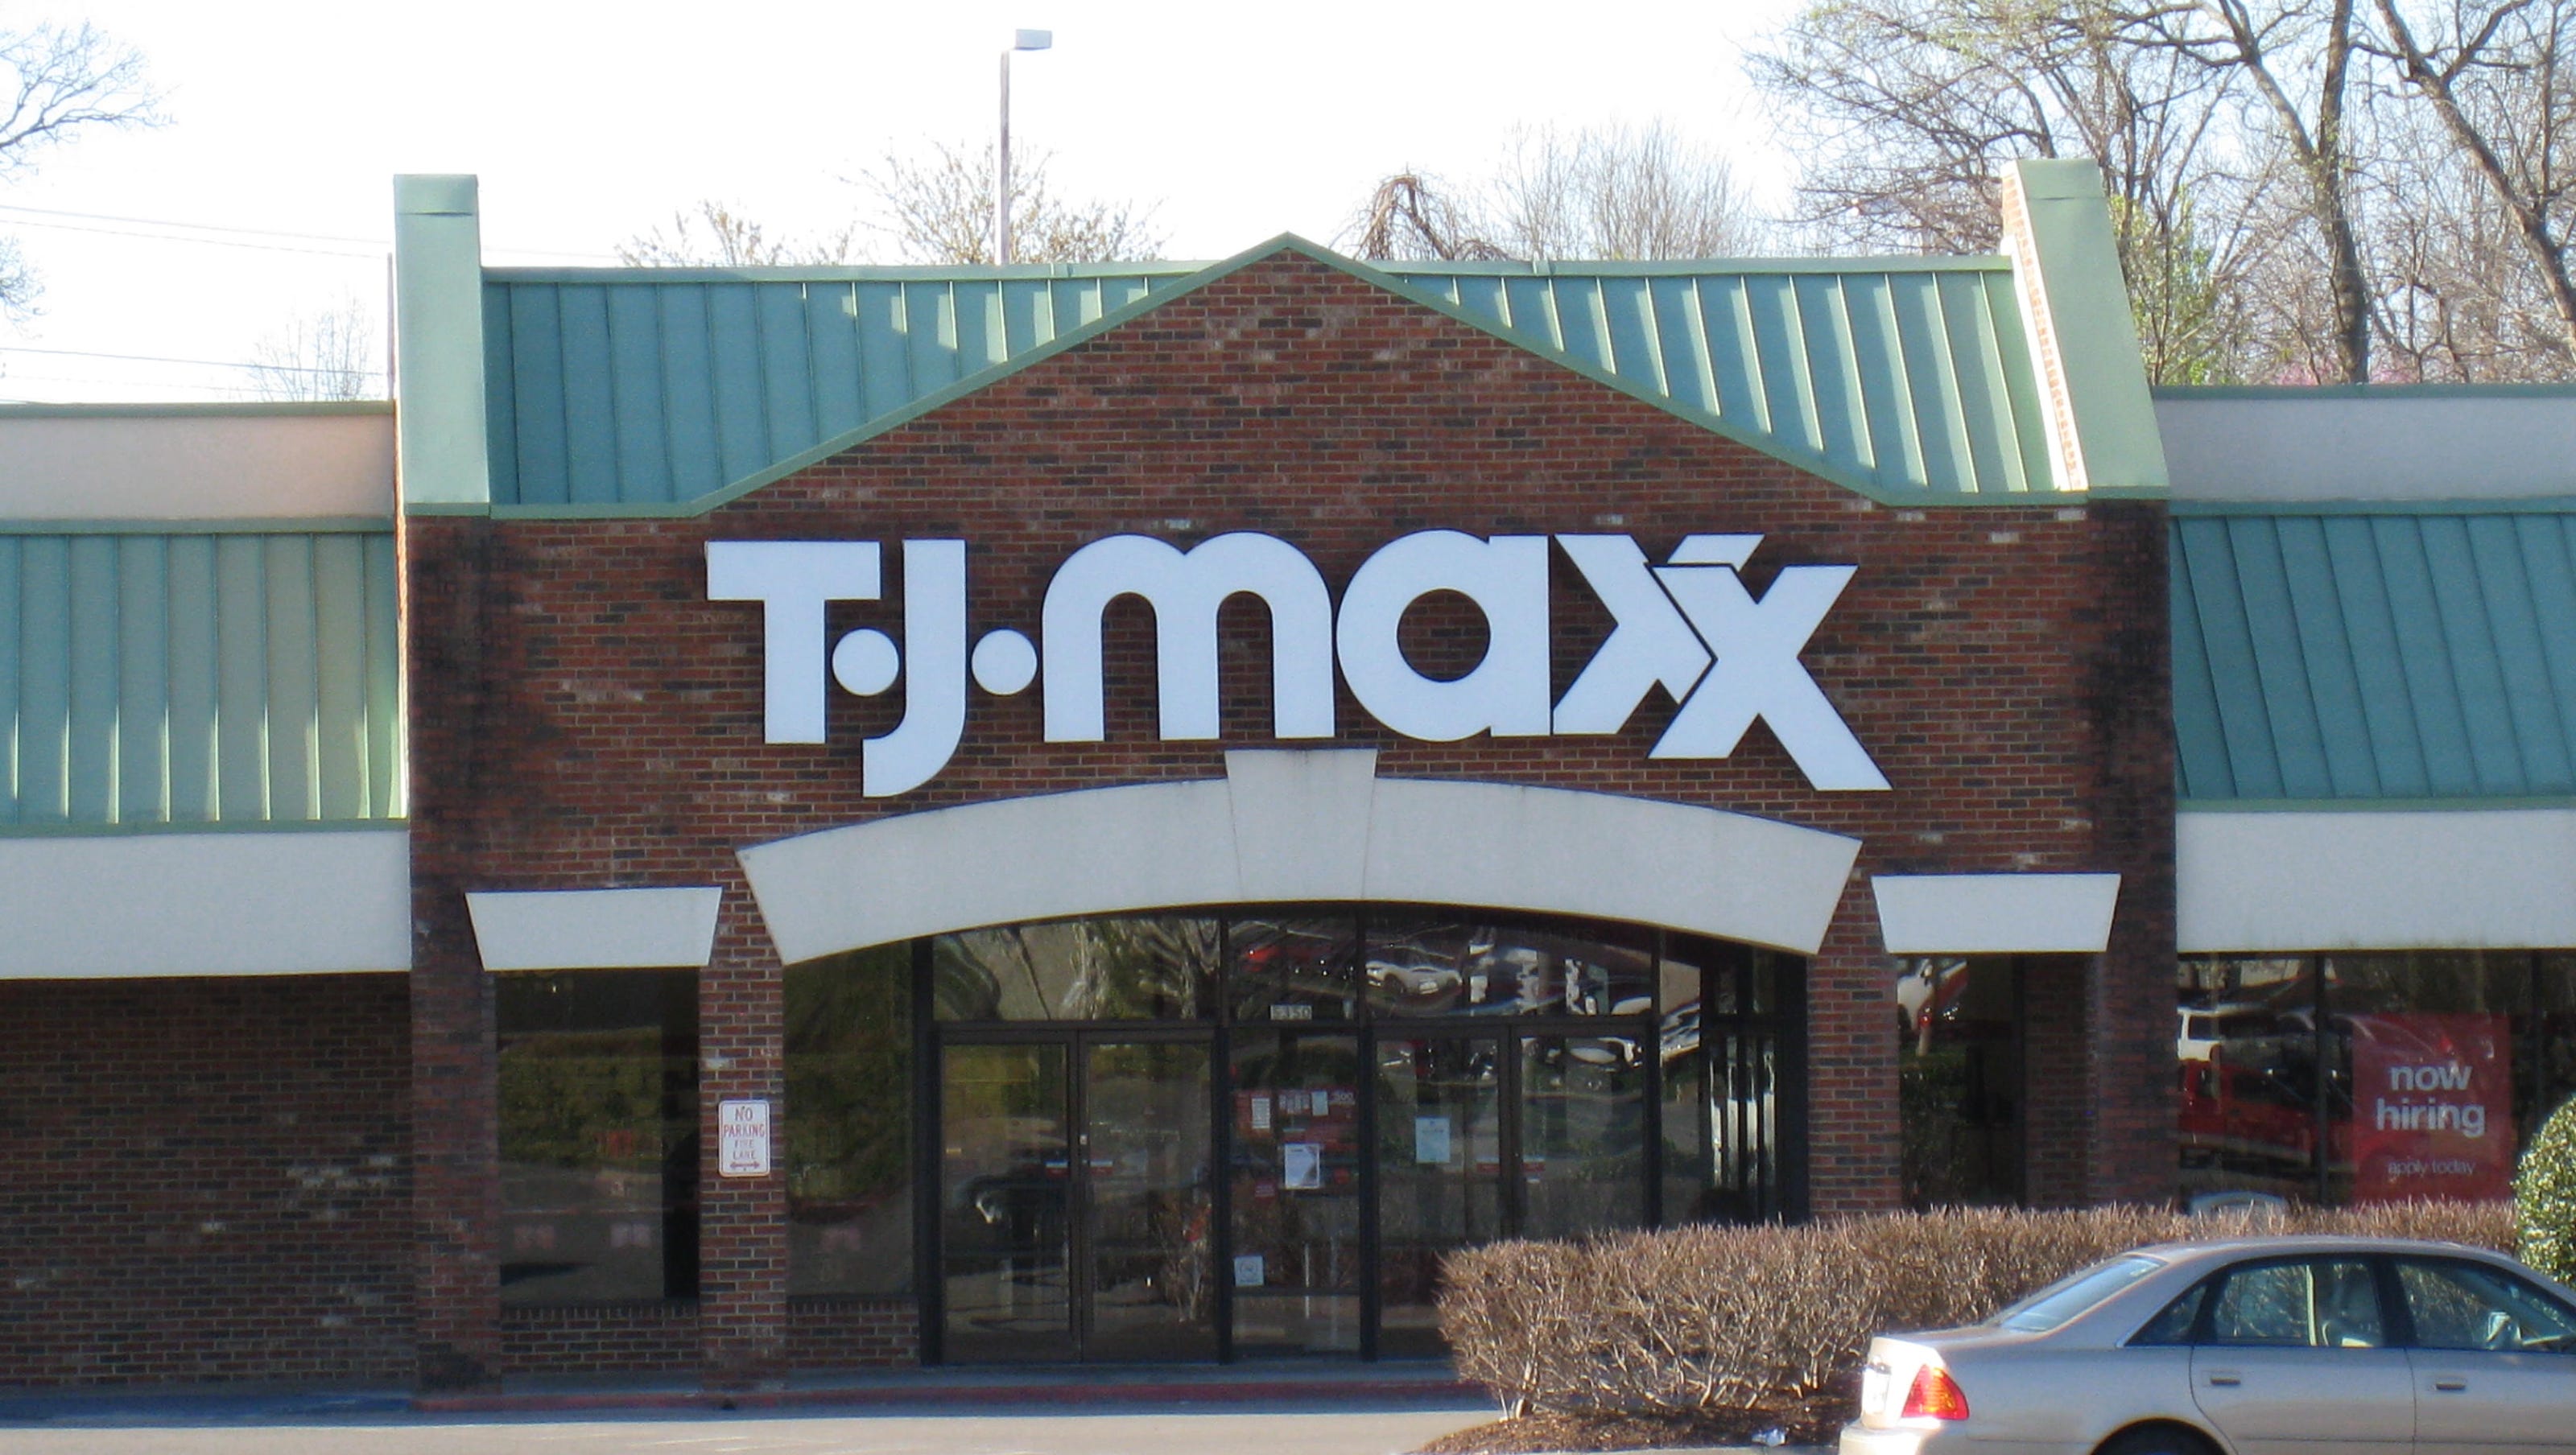 Middle Eastern investor buys Antioch retail center